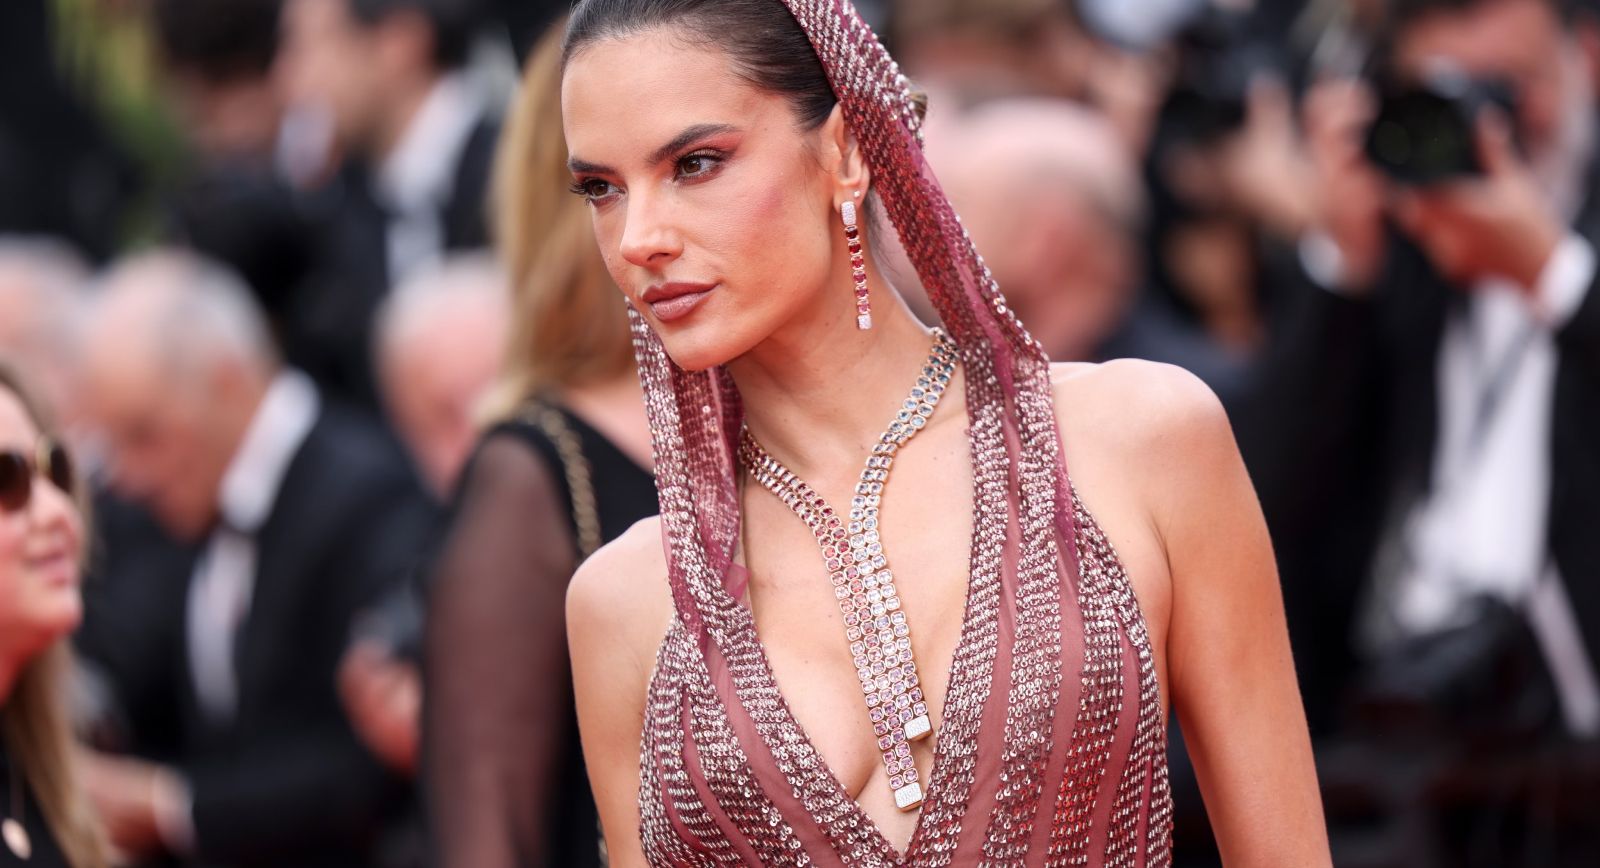 Retrospective: The Cannes Film Festival in 25 spectacular jewels